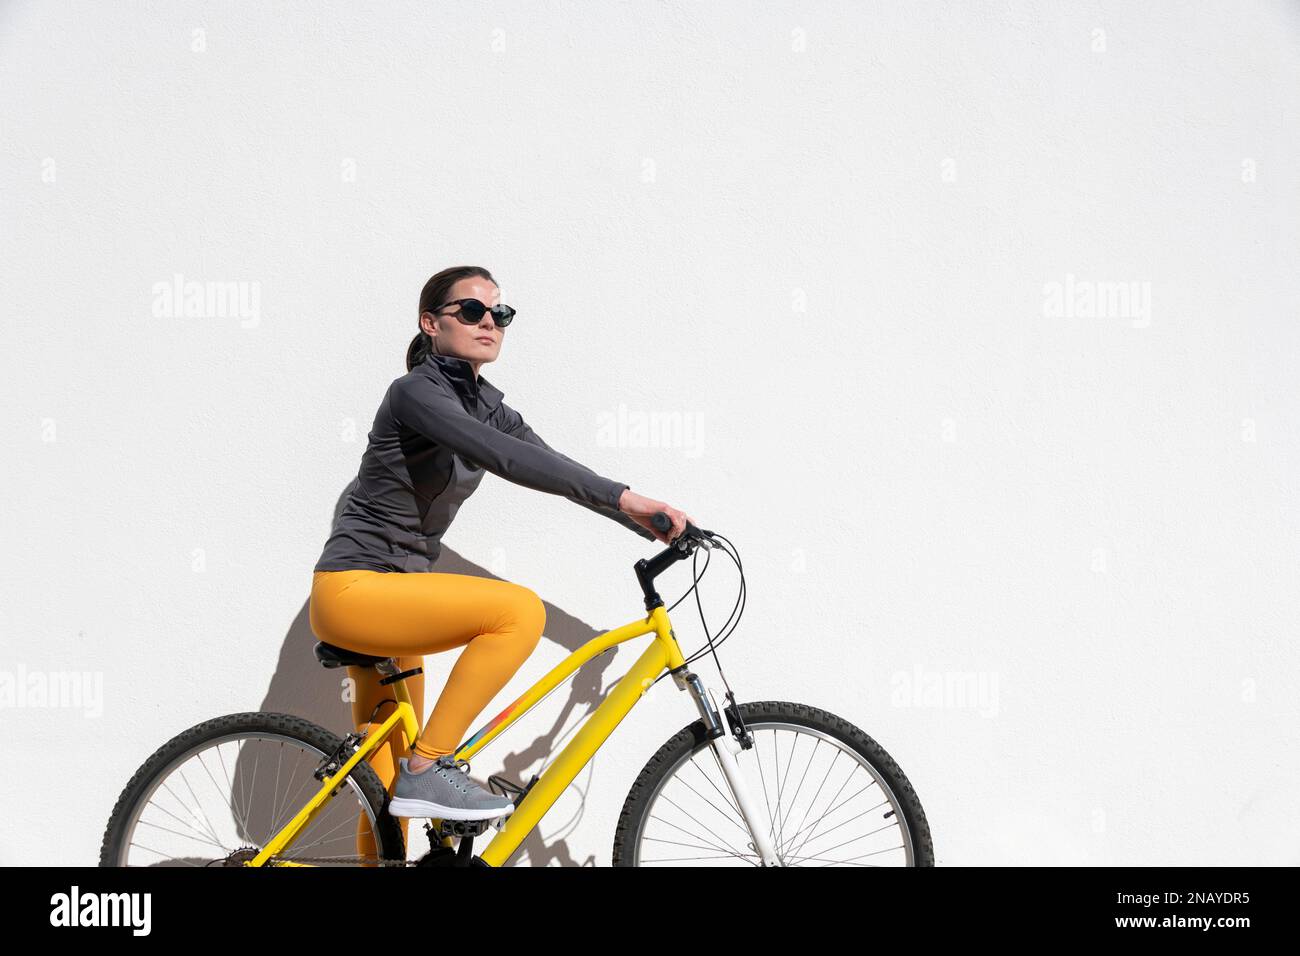 Fit, female cyclist riding a yellow bicycle Stock Photo